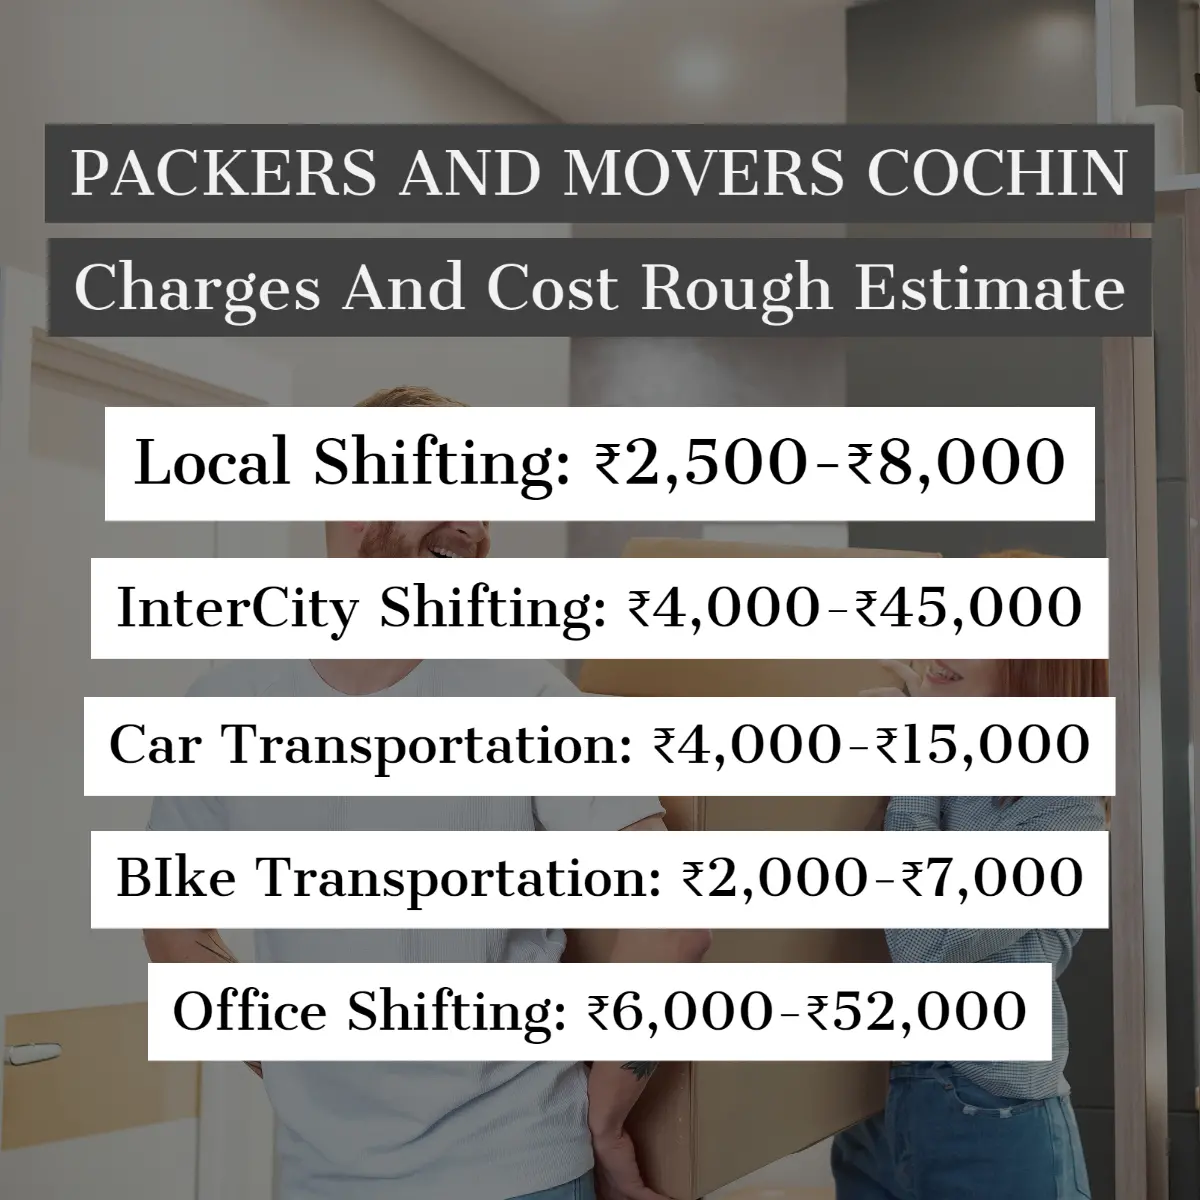 Packers and Movers Cochin Charges